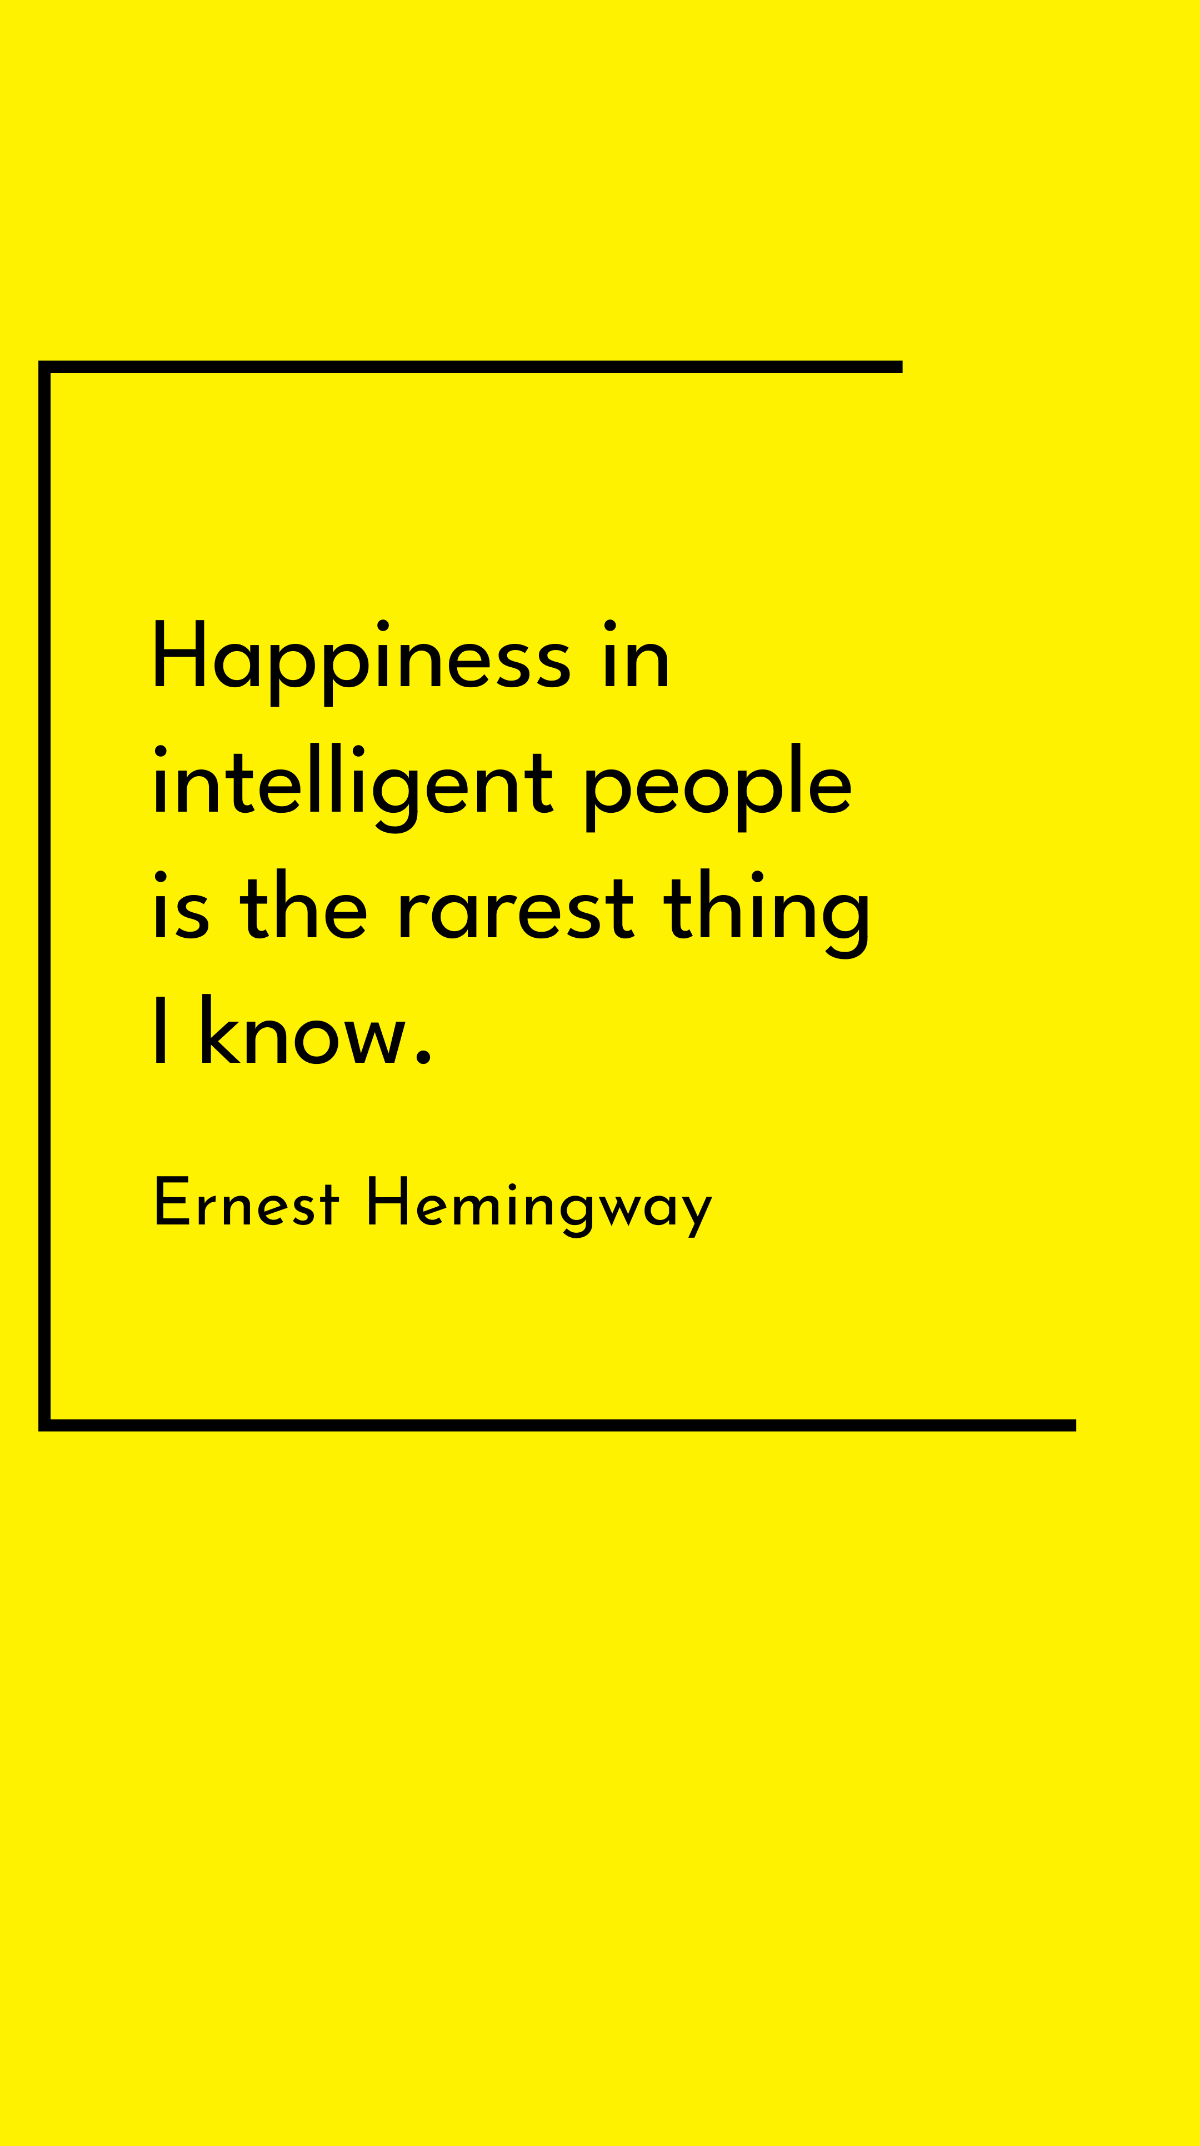 Ernest Hemingway - Happiness in intelligent people is the rarest thing I know. Template